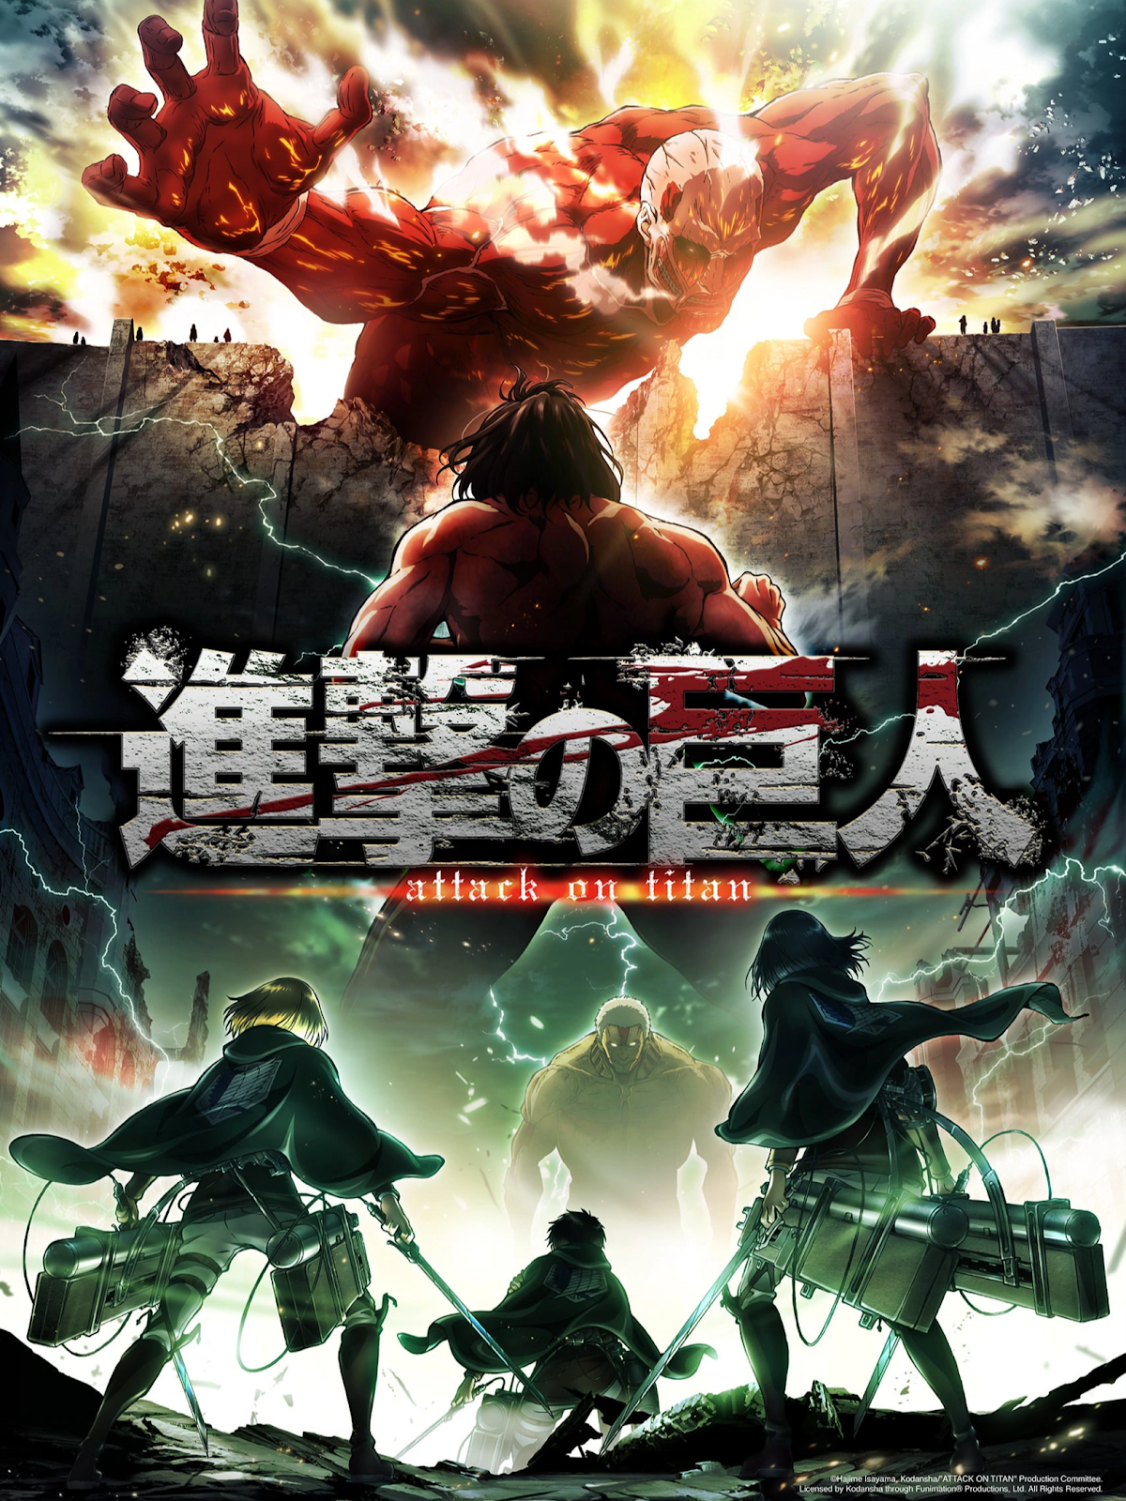 Attack on Titan creator has no intention for sequel anime or manga